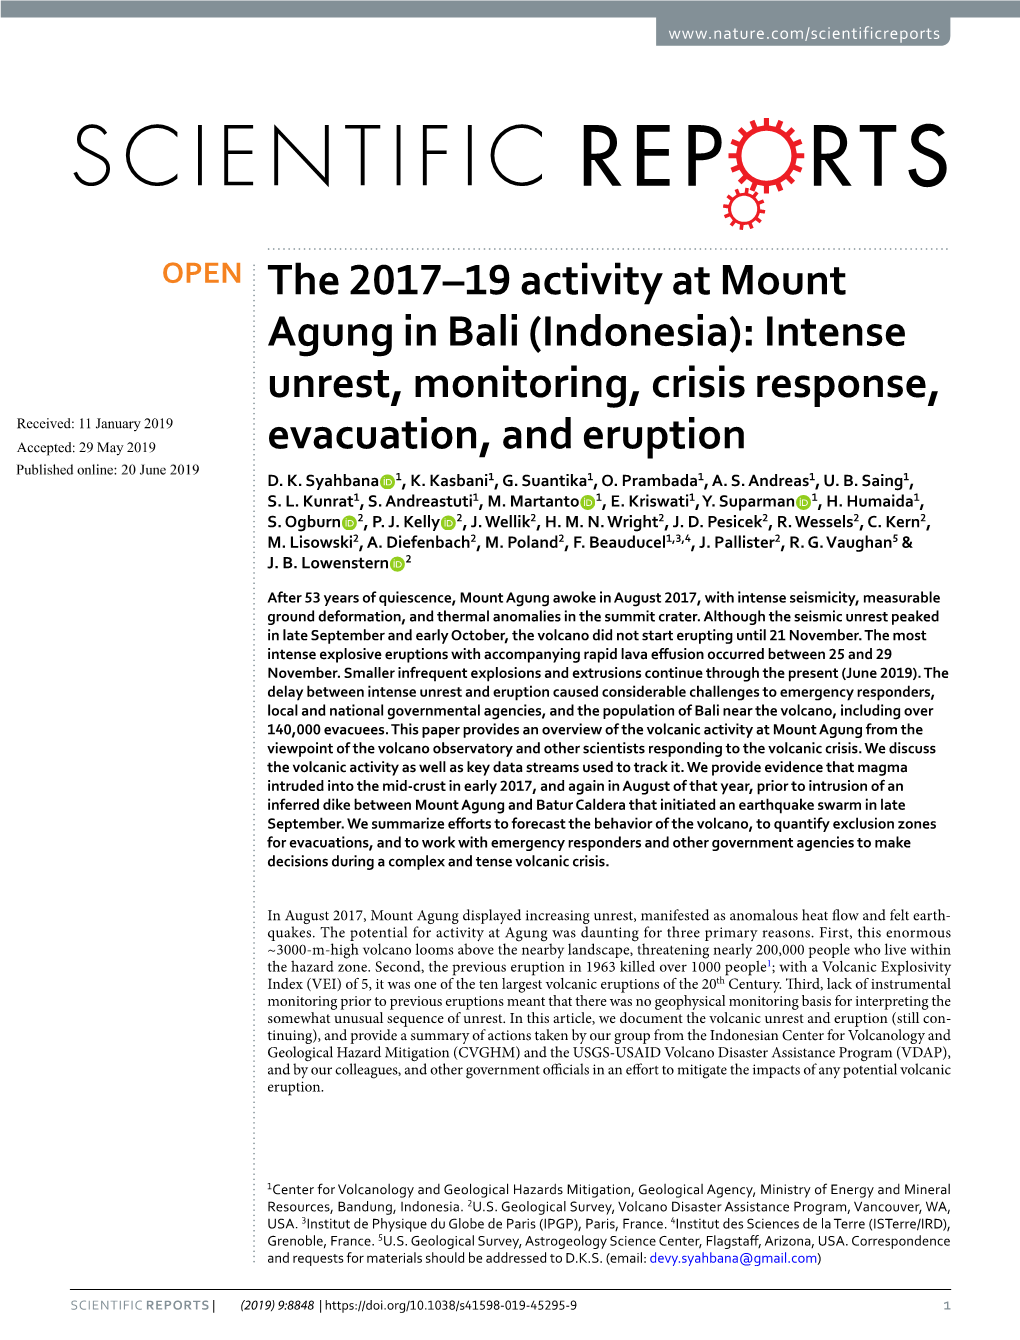 The 2017–19 Activity at Mount Agung in Bali (Indonesia)